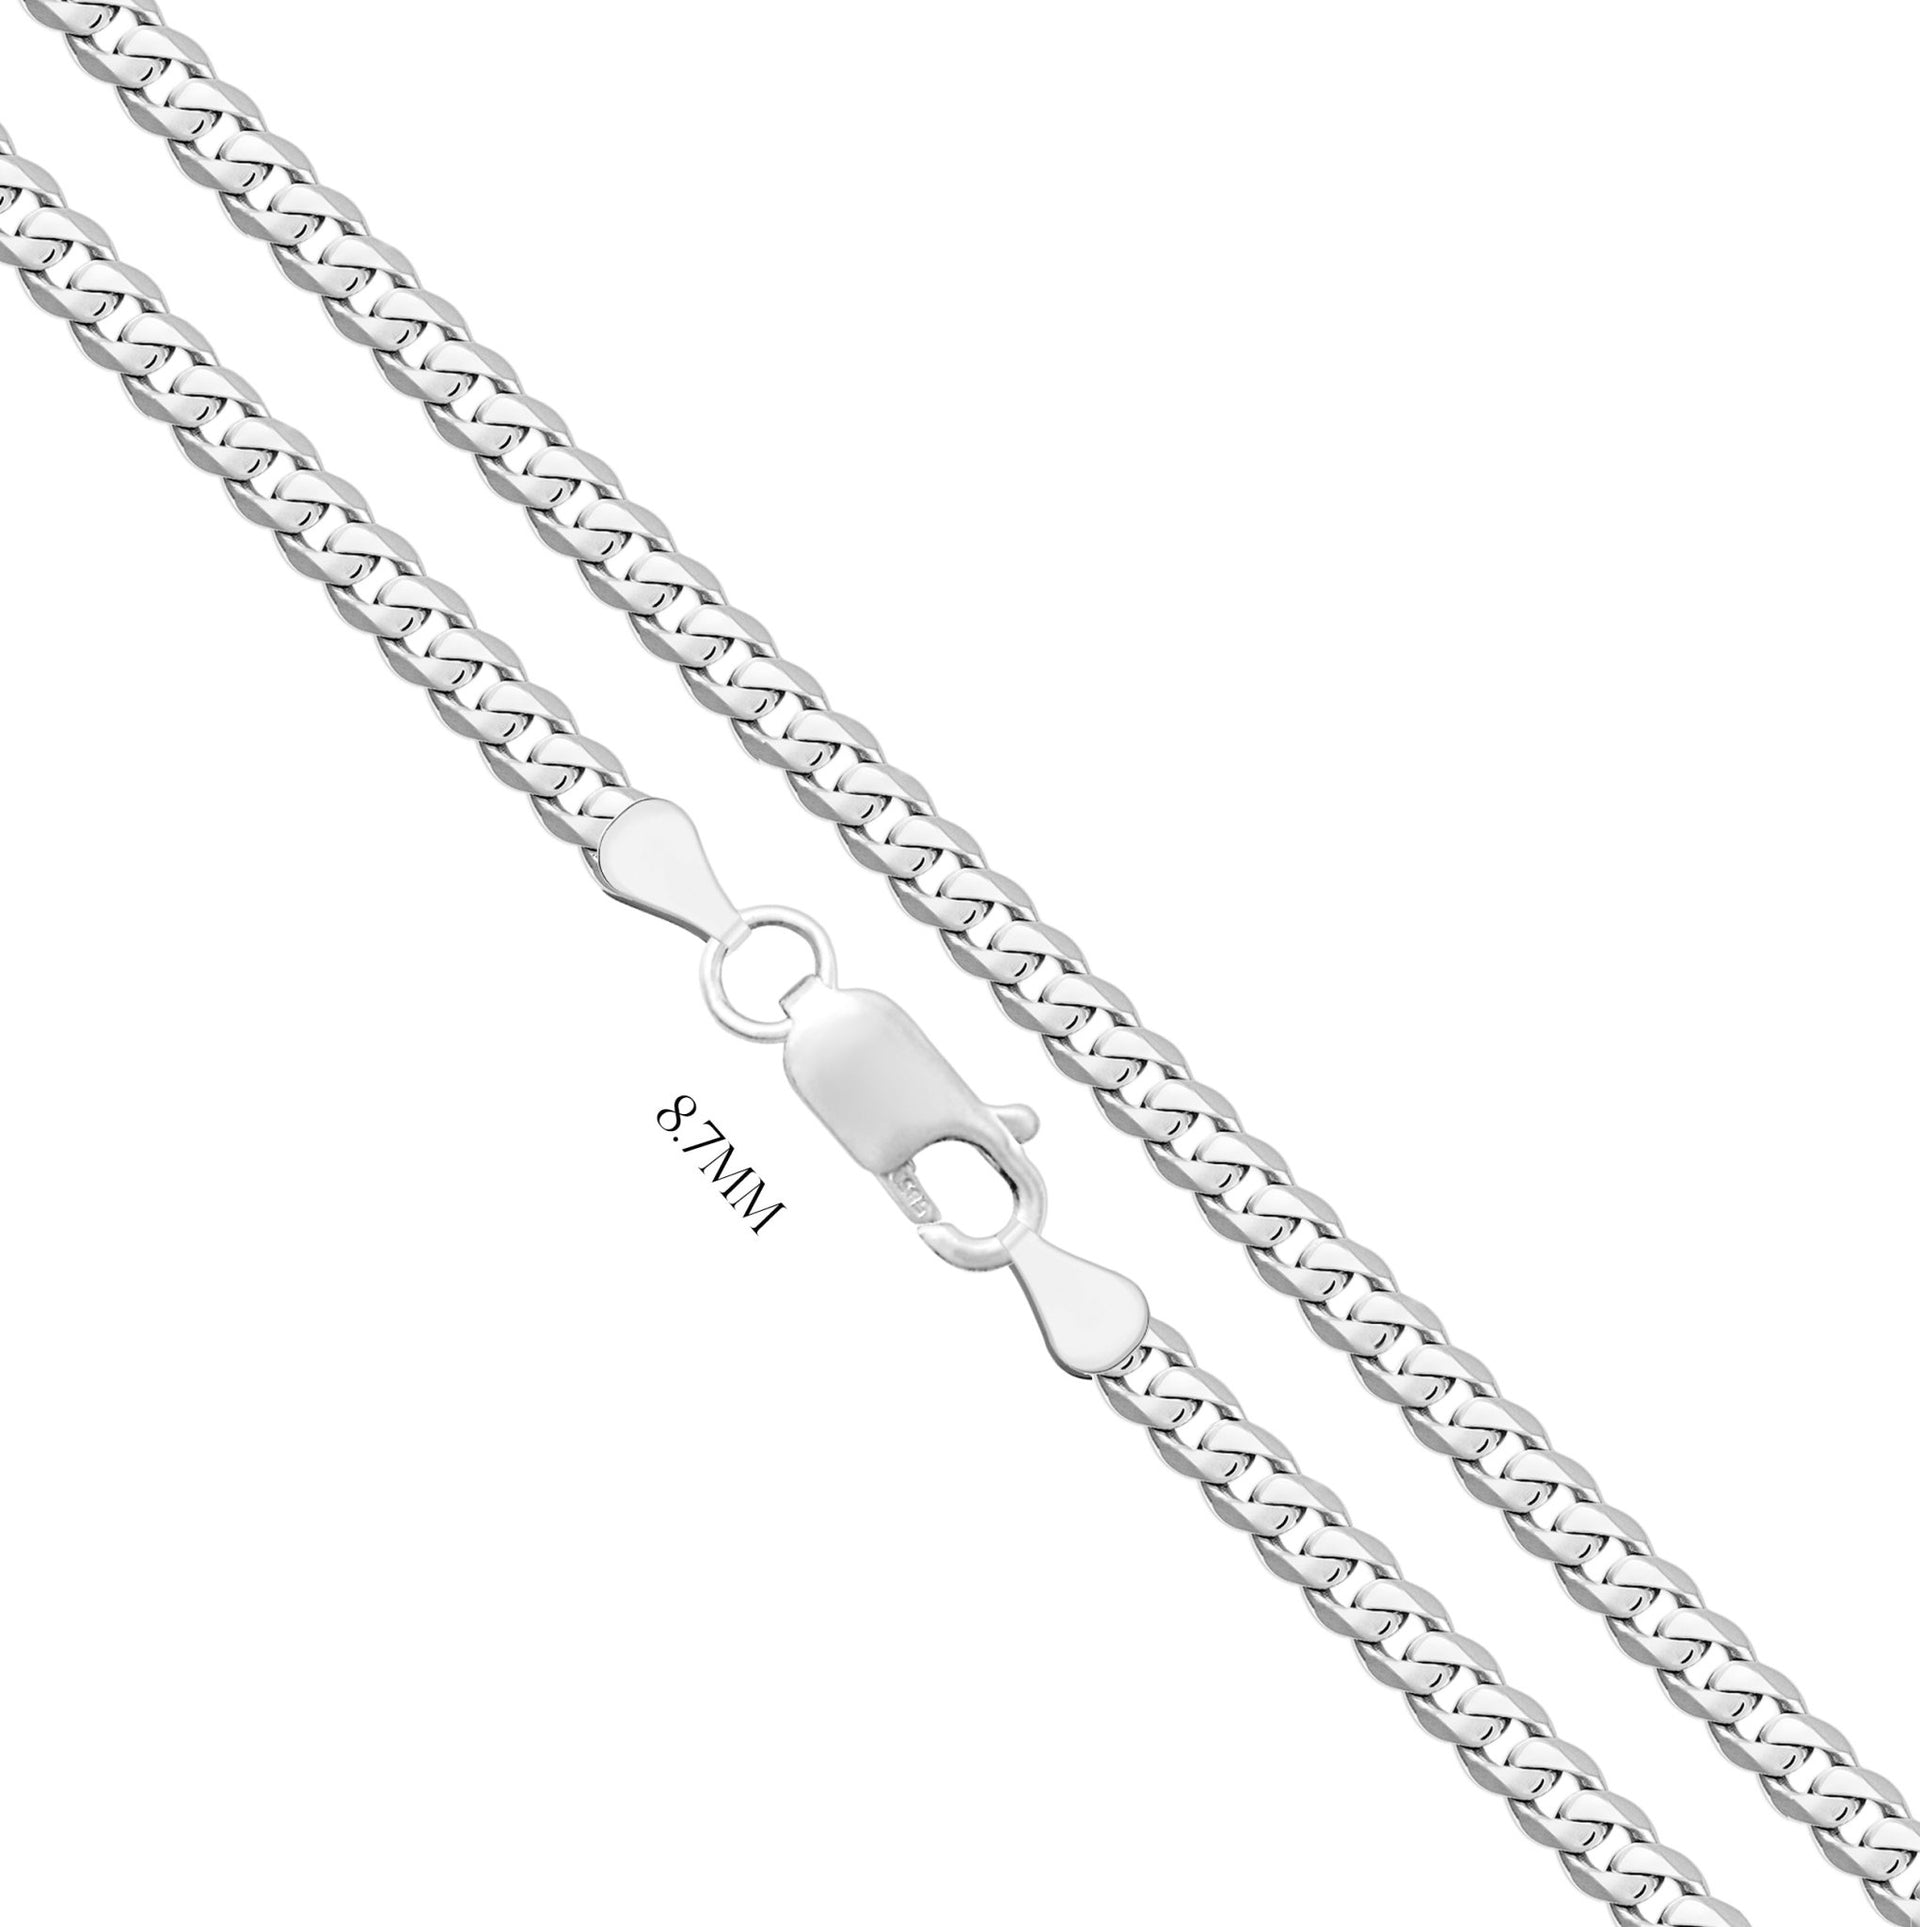 Solid 925 Sterling Silver Curb Chain Bracelet, Sizes 2.2mm - 9.5mm